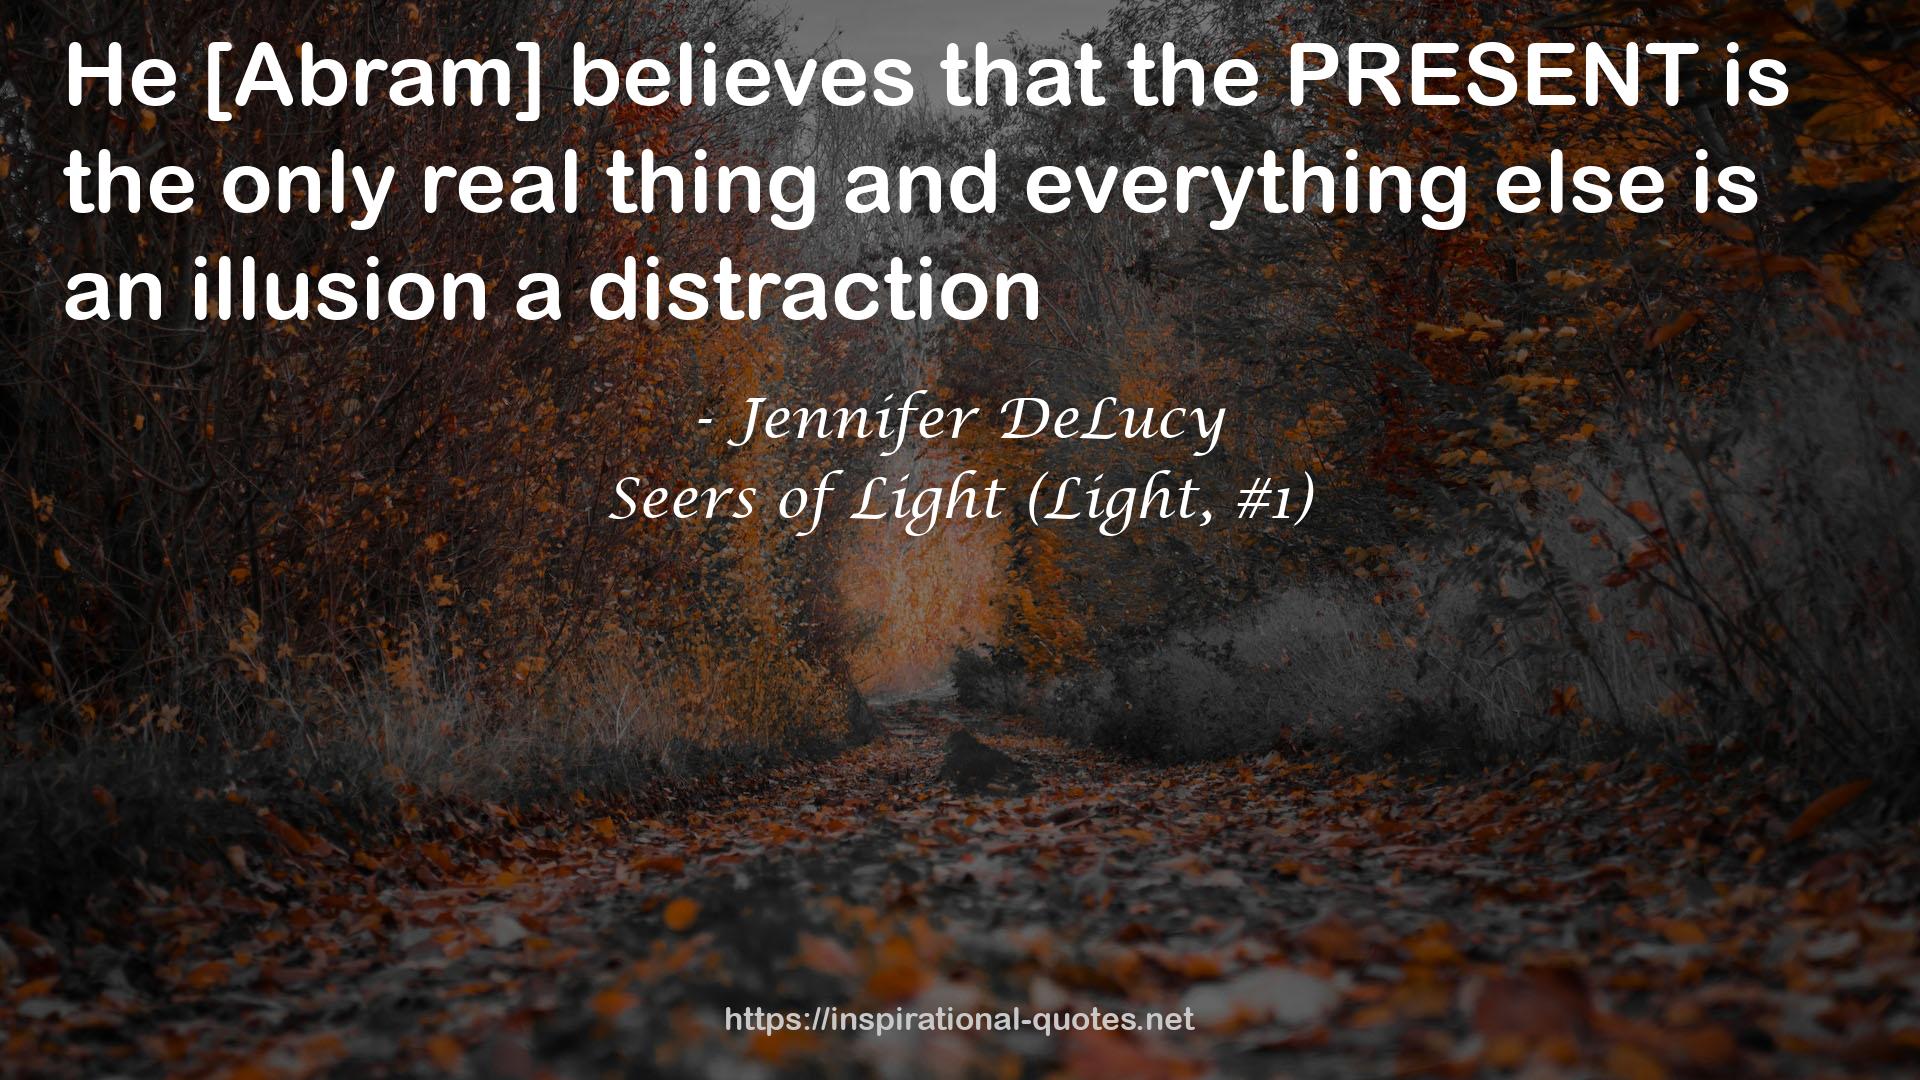 Seers of Light (Light, #1) QUOTES